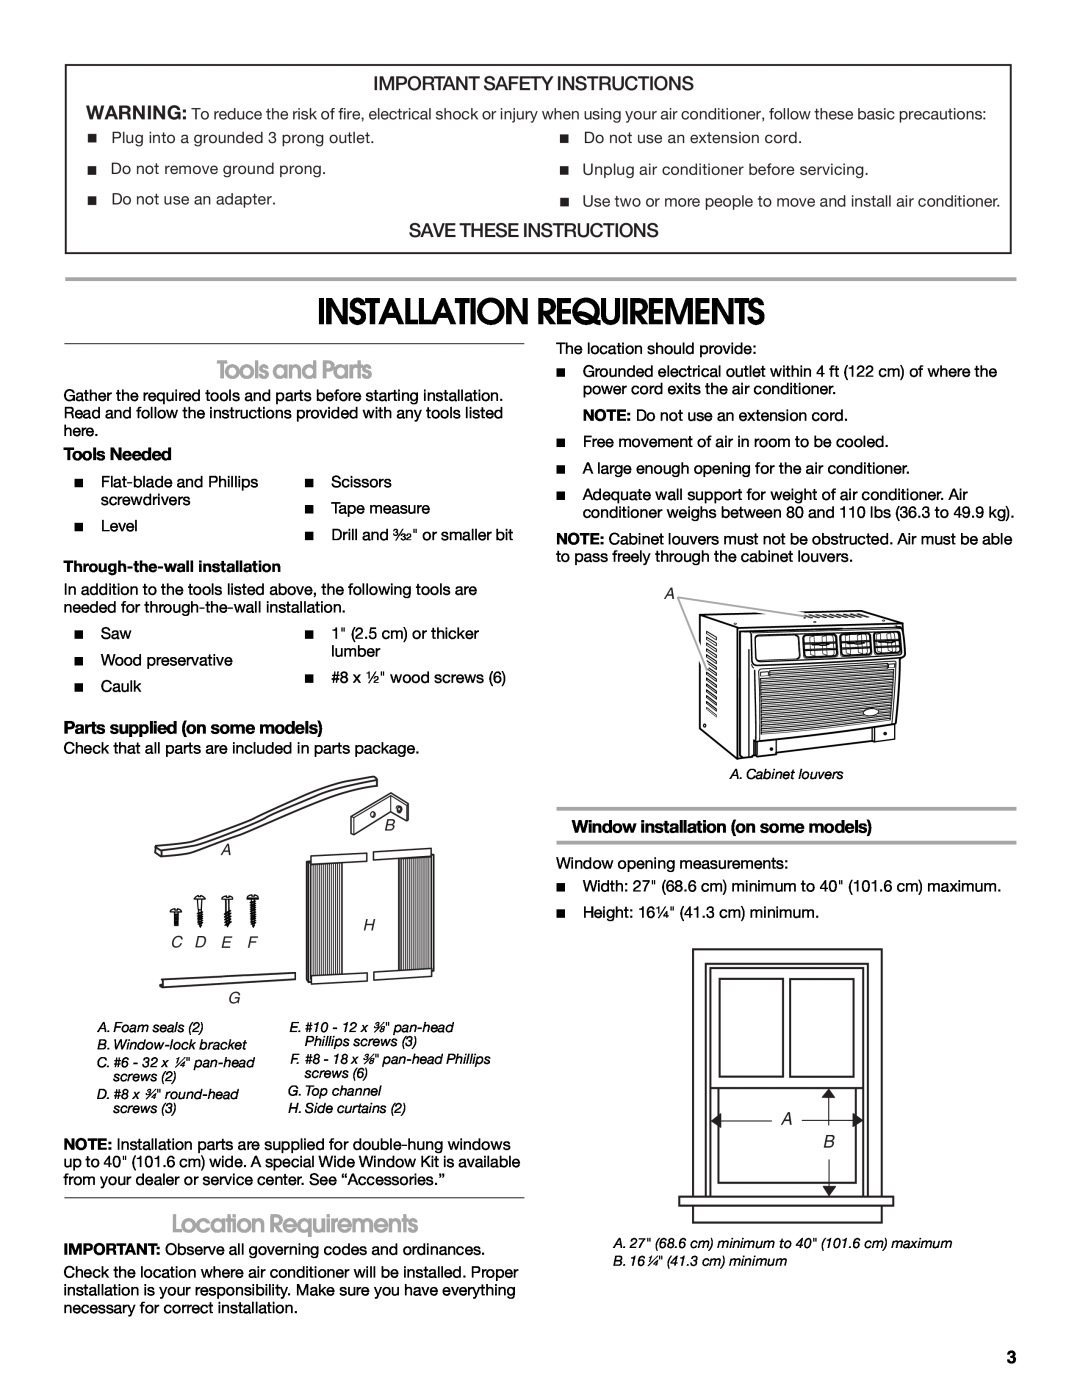 Whirlpool ACE082XR0 manual Installation Requirements, Tools and Parts, Location Requirements, Important Safety Instructions 